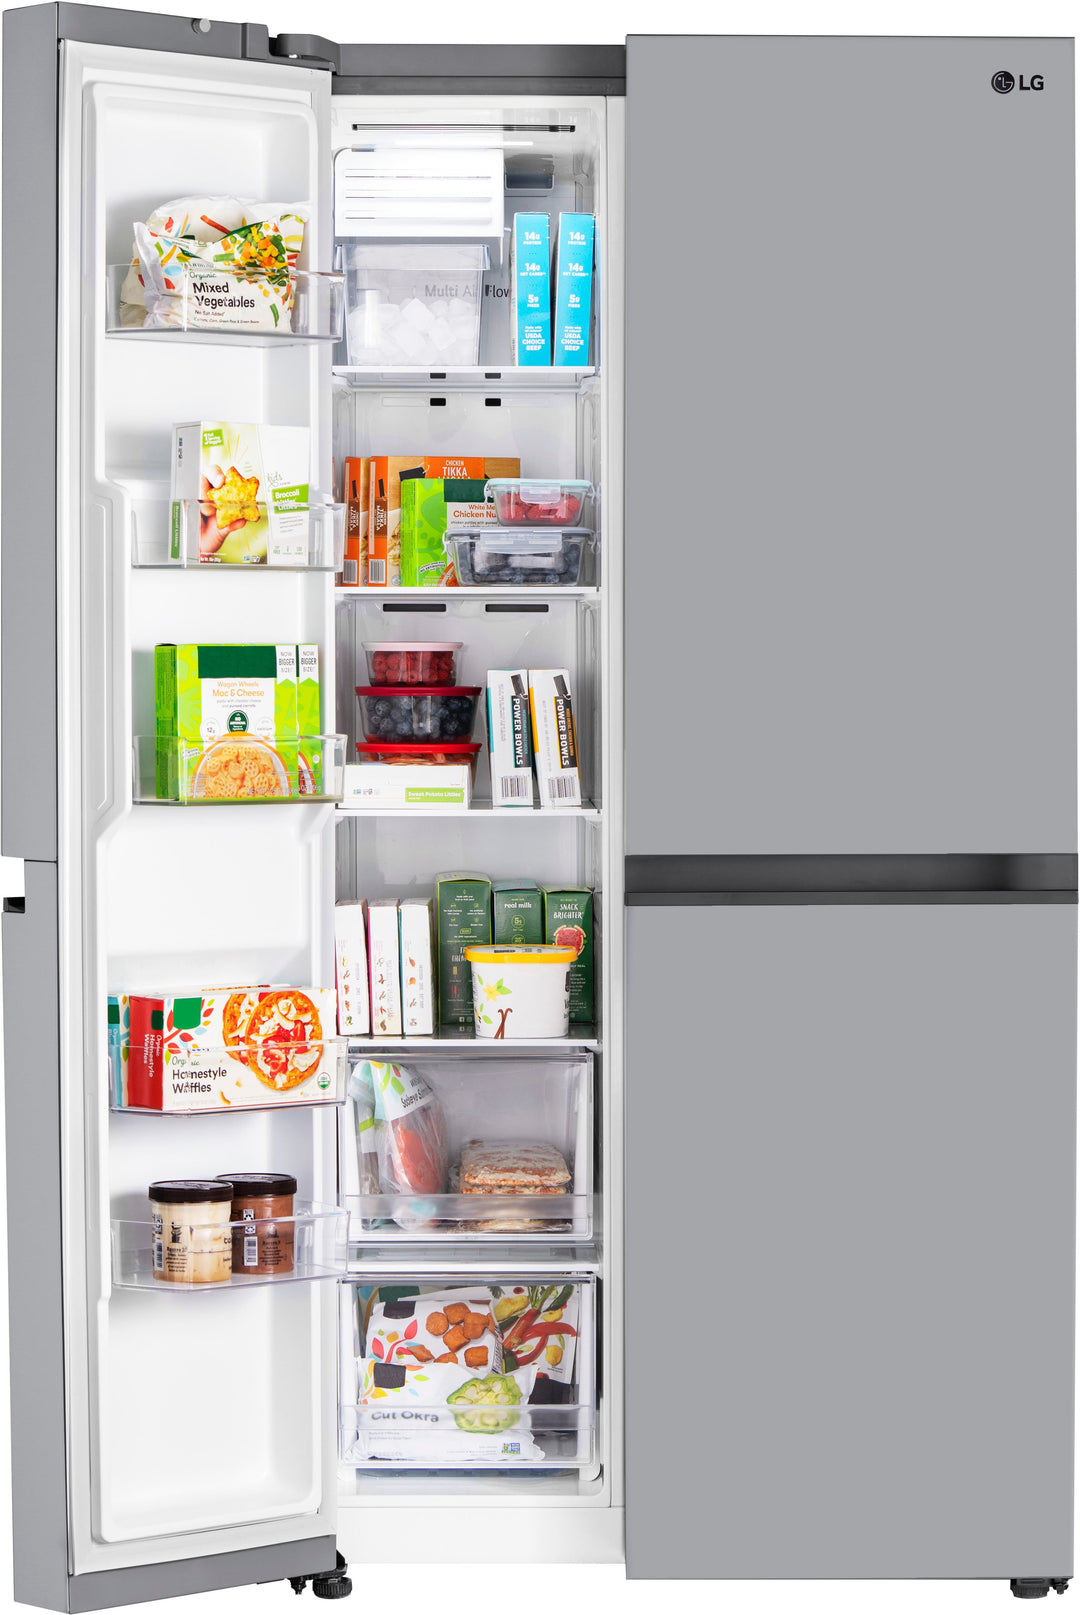 LG - 27.6 Cu. Ft. Side-by-Side Smart Refrigerator - Stainless steel_13